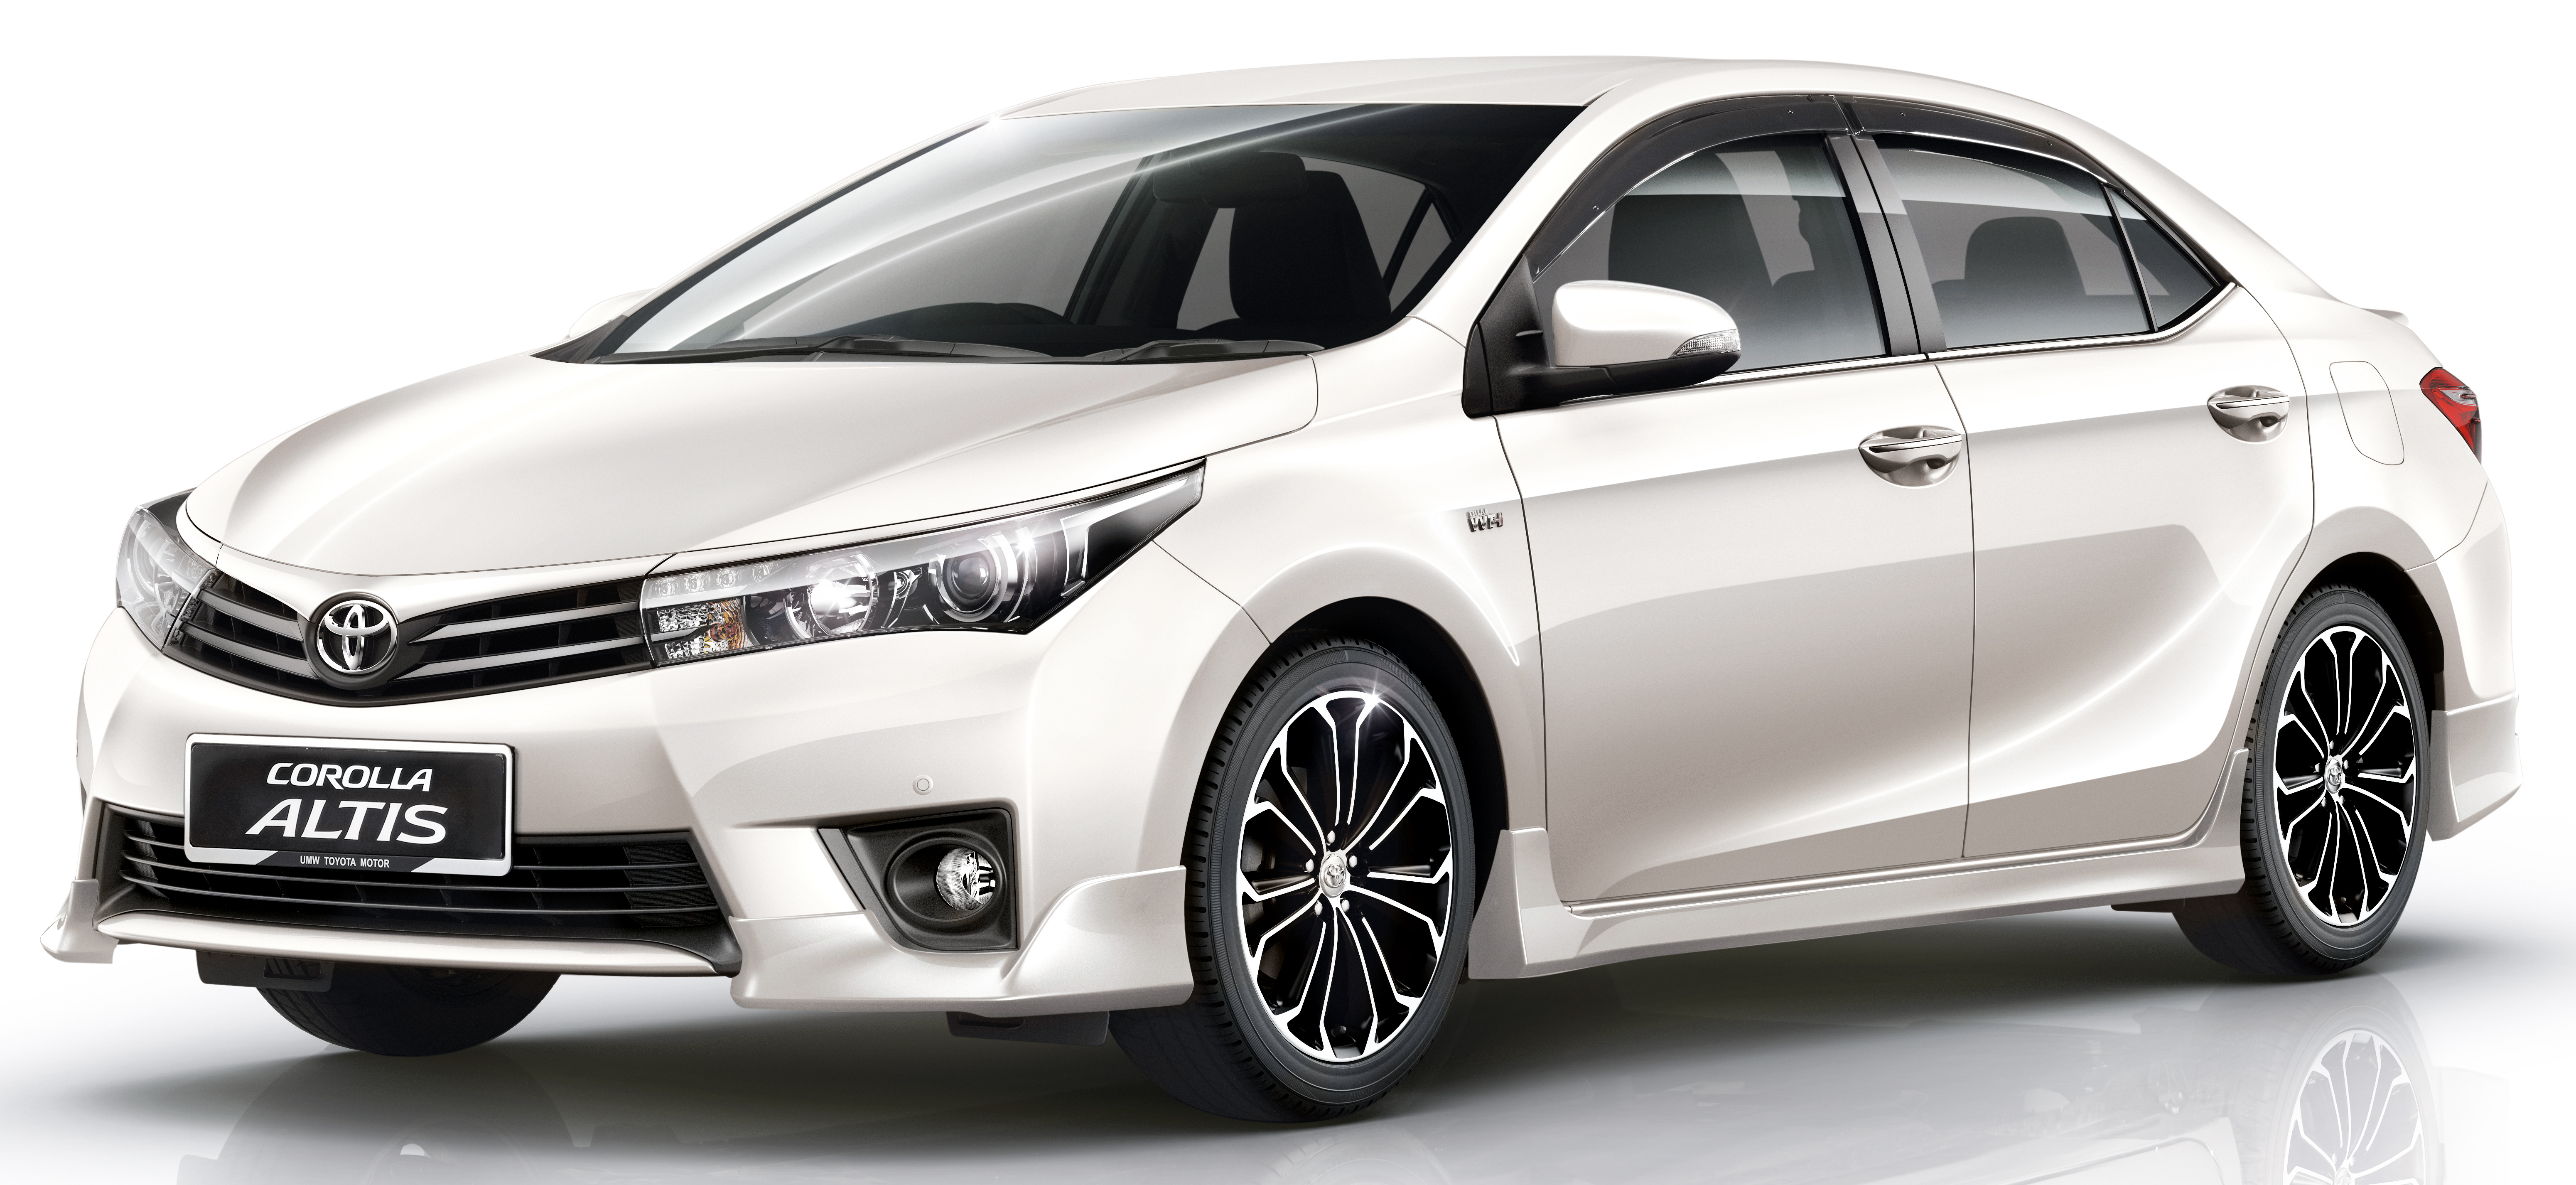 2014 Toyota Corolla Altis Malaysian prices confirmed: RM114k-136k